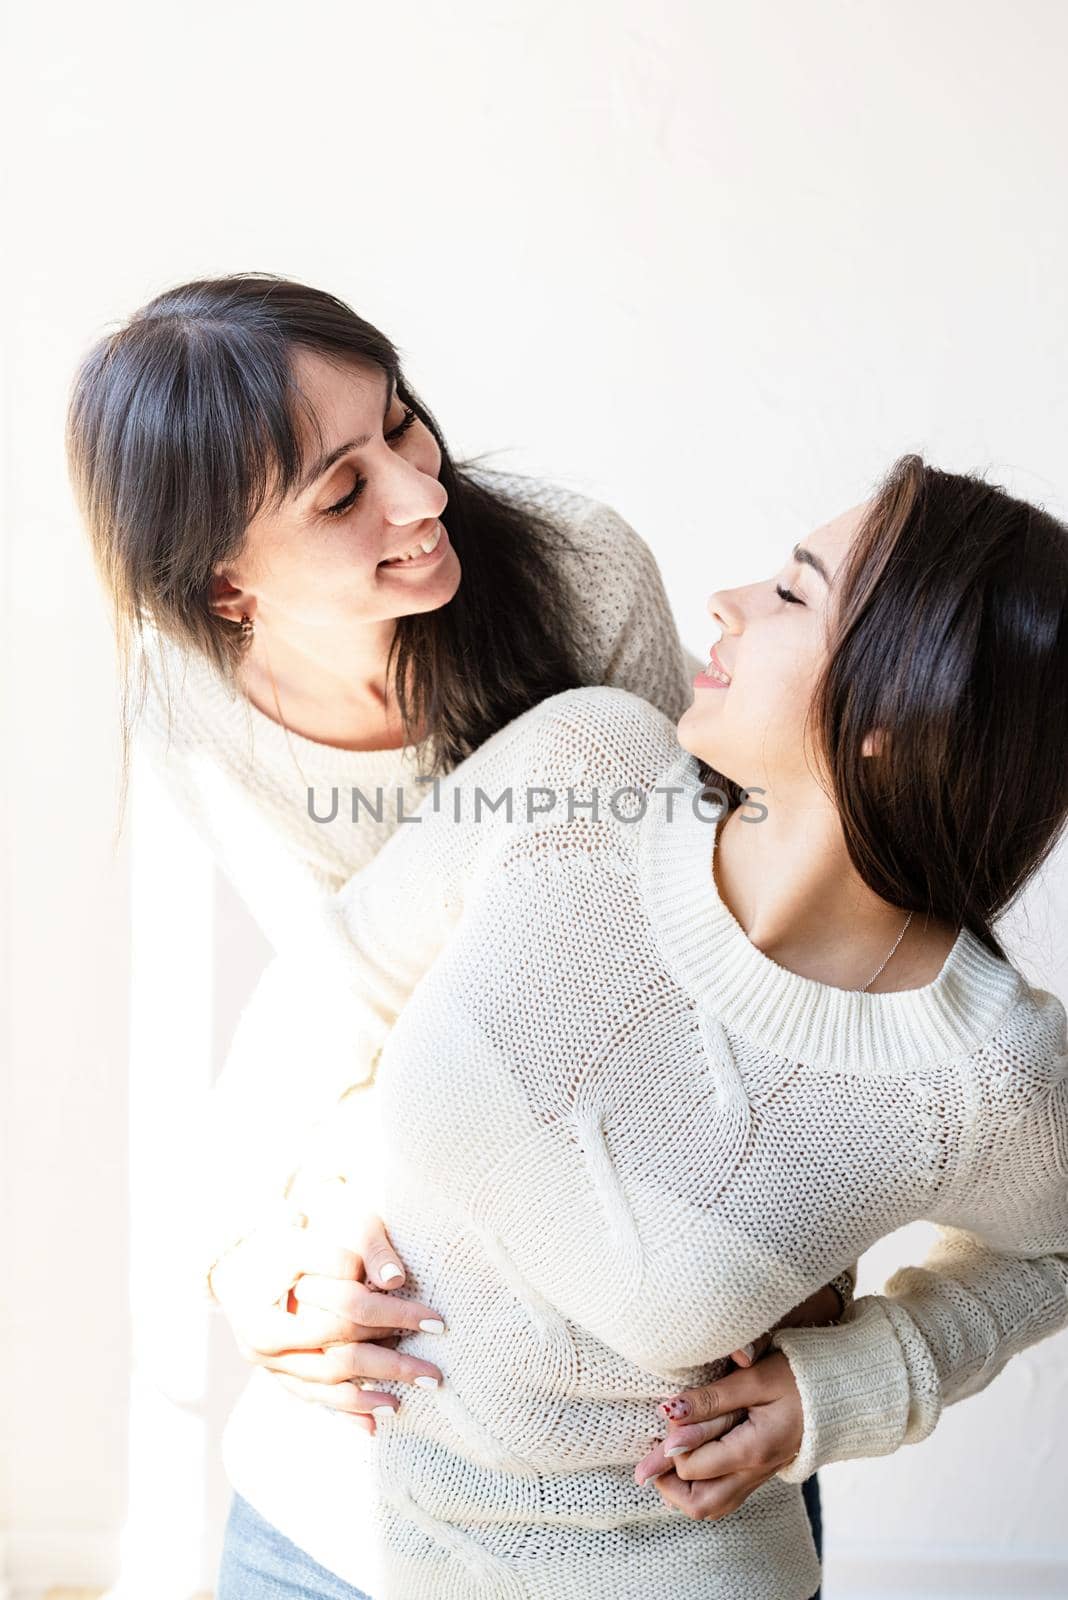 Two female best friends embracing each other standing on white background